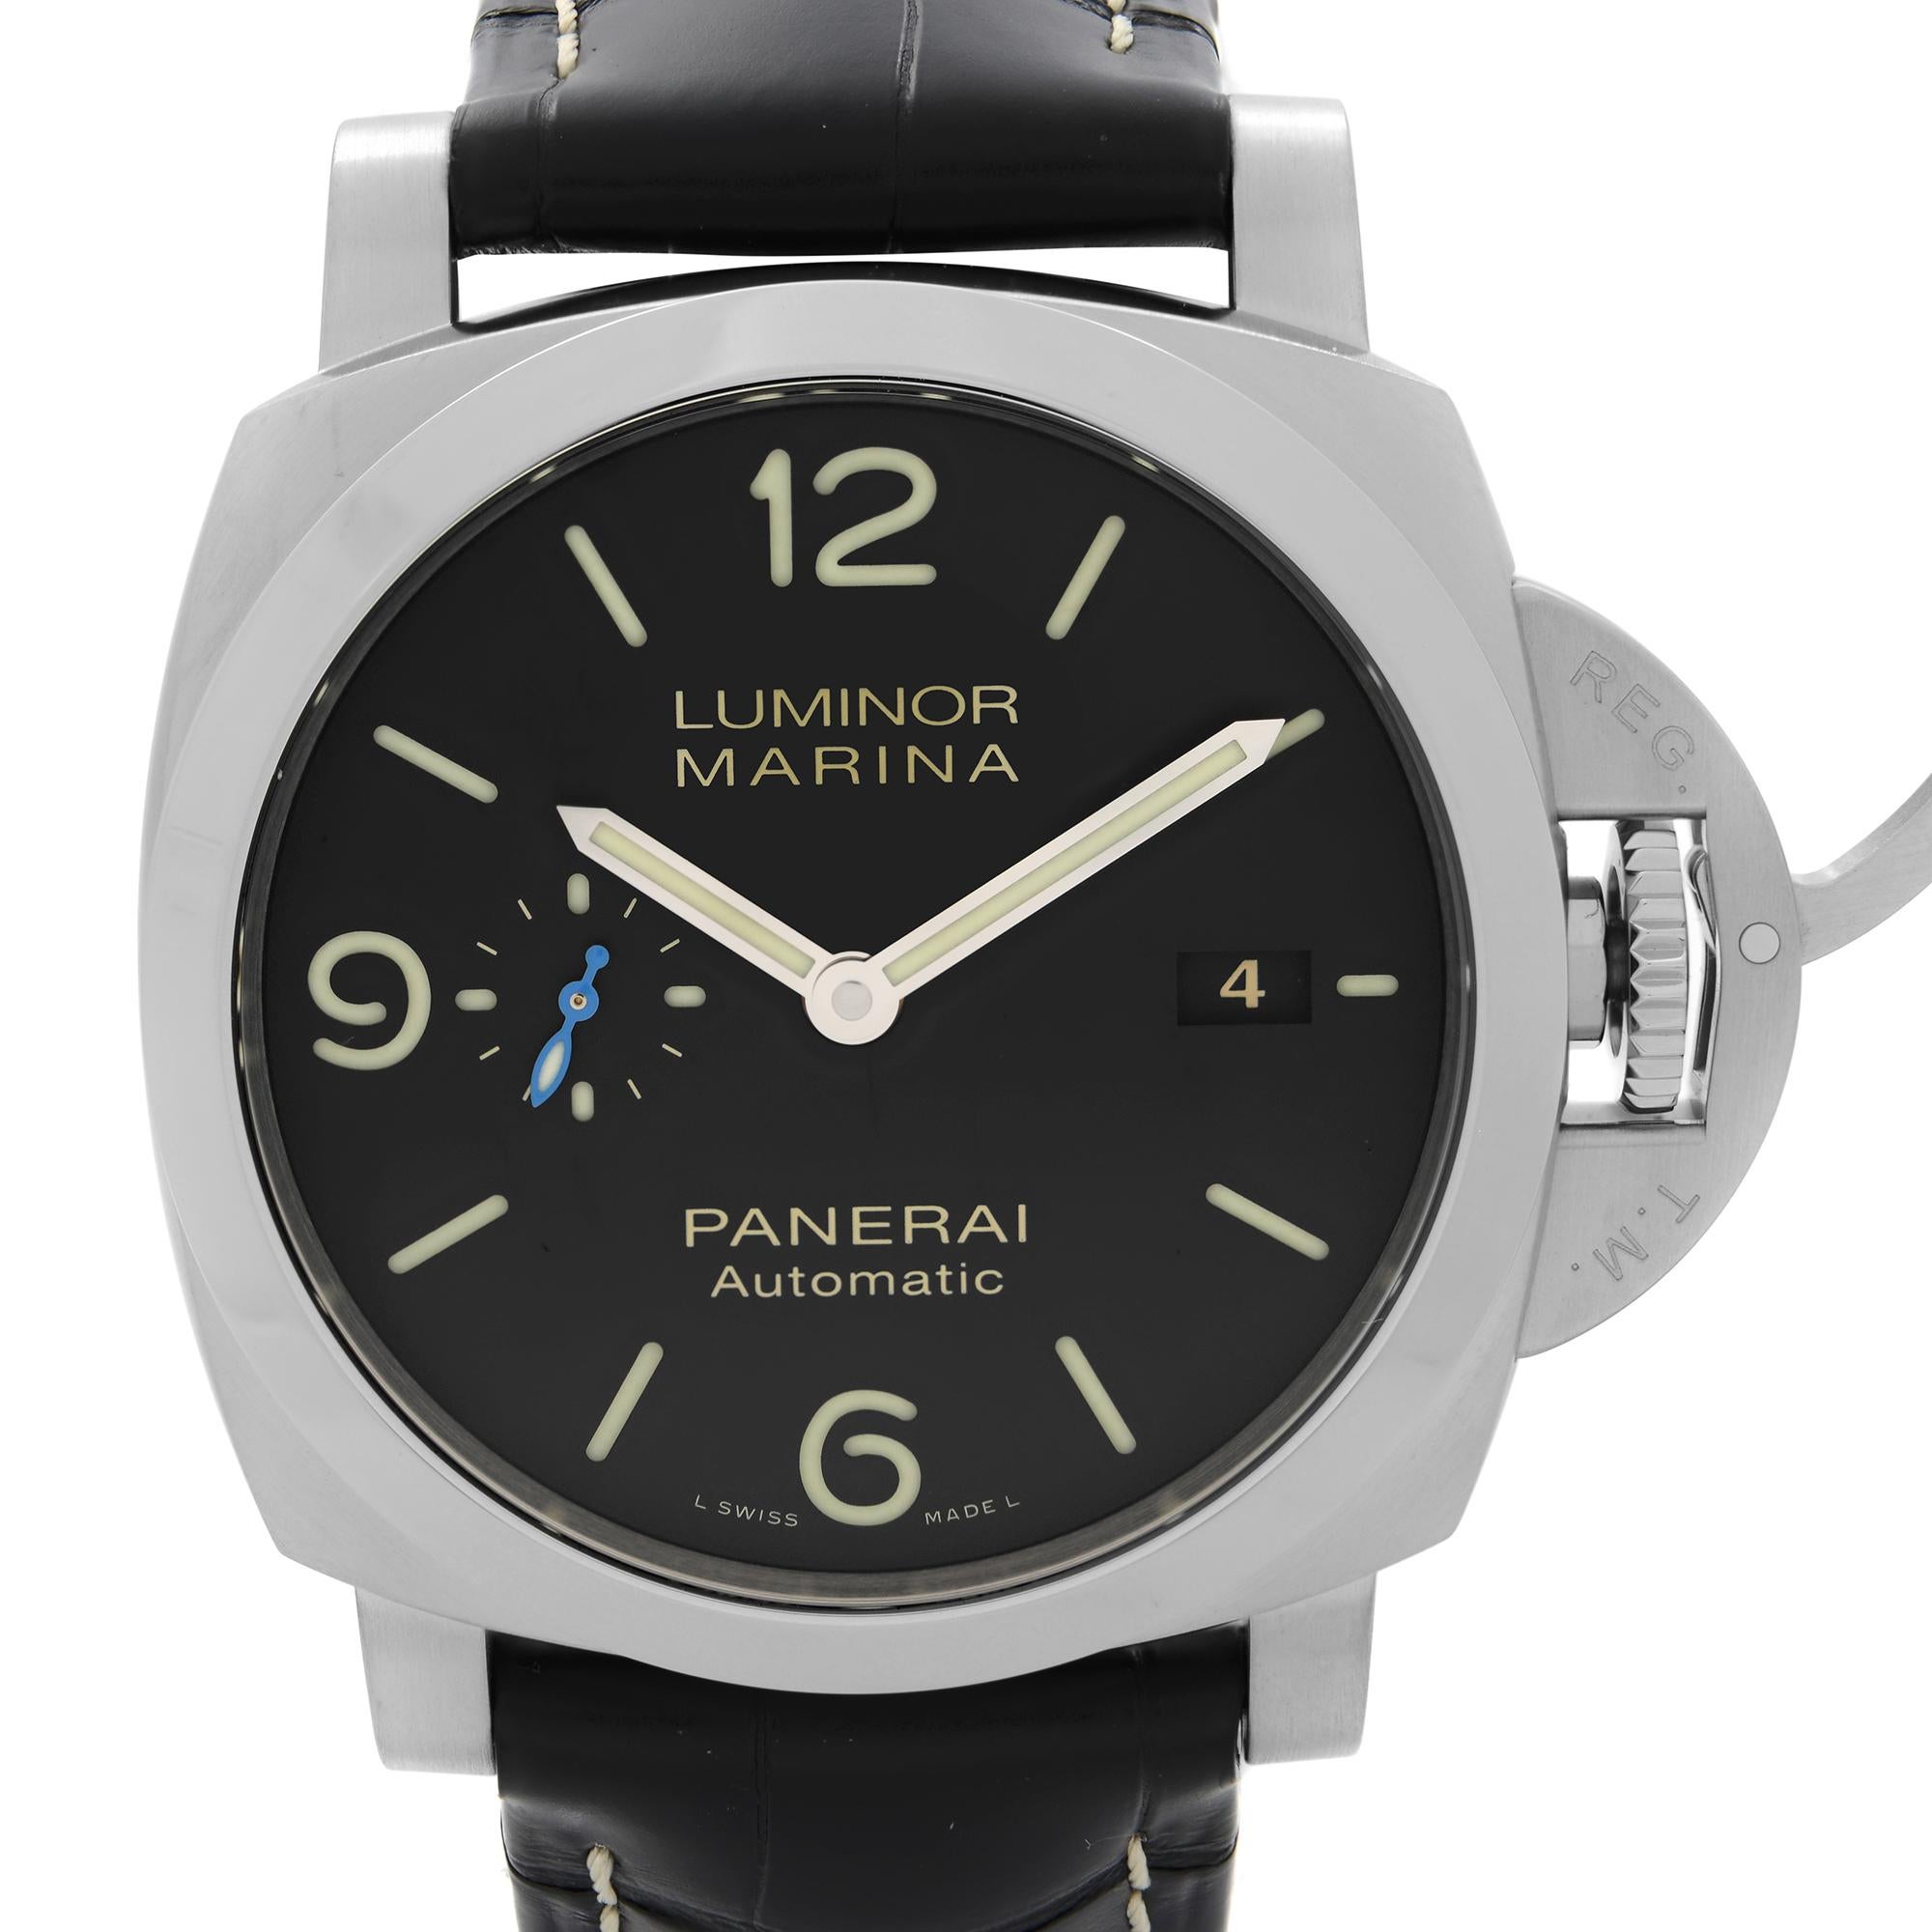 Never worn Panerai Luminor Marina Steel Black Dial Leather Strap Automatic Watch PAM01312. This Beautiful Timepiece is Powered by Mechanical (Automatic) Movement And Features: Stainless Steel Case with a Two-Piece Black Alligator Leather Strap.